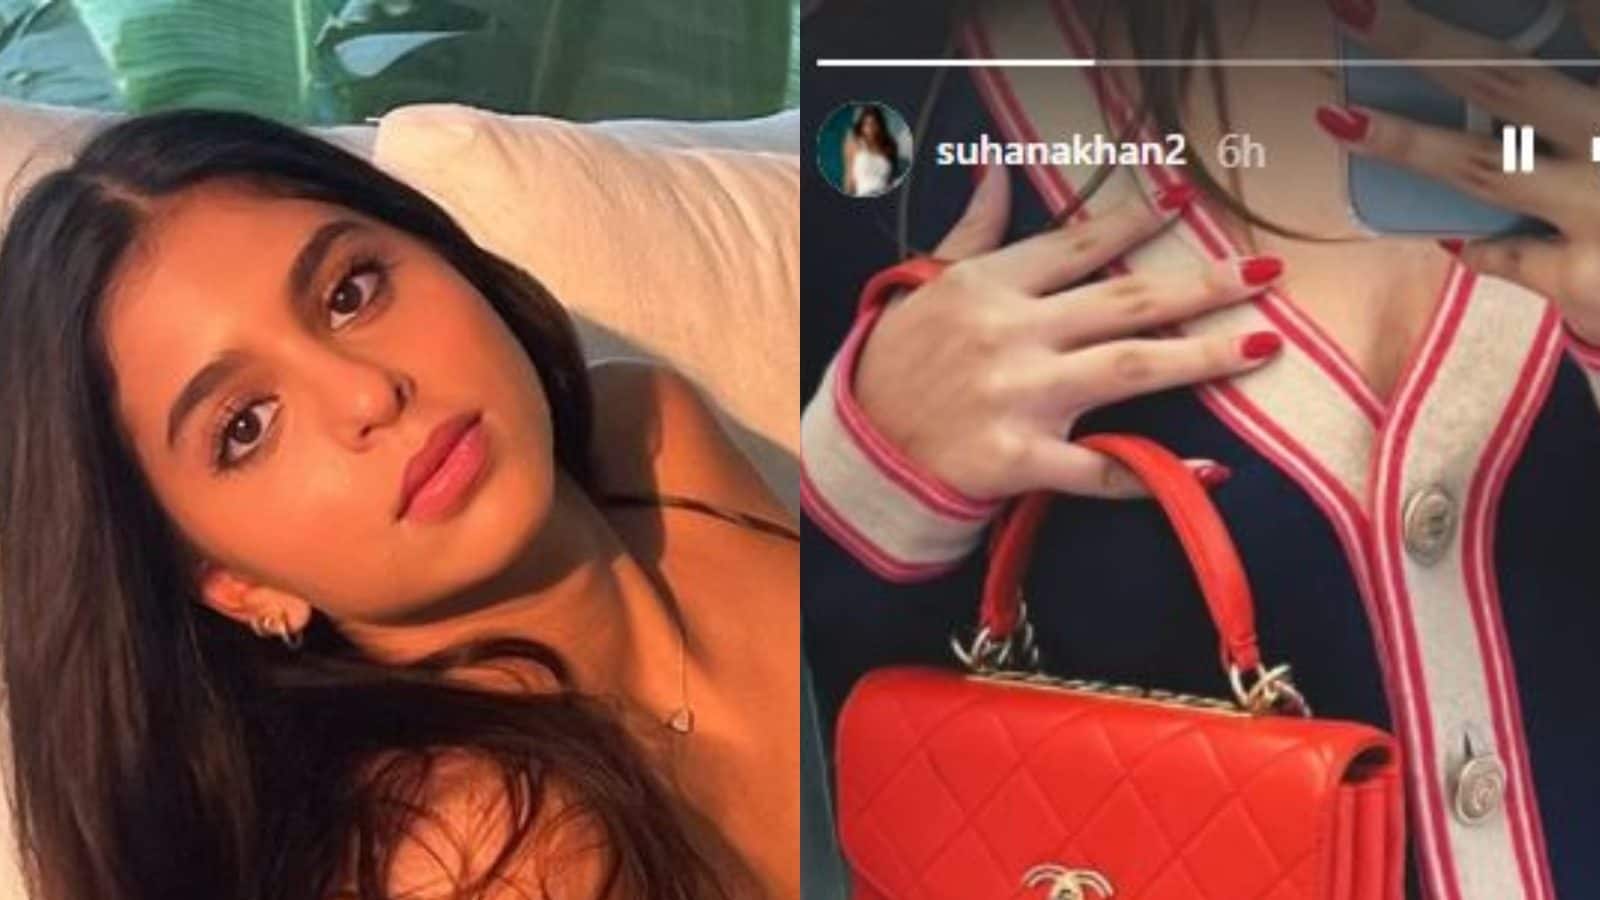 Suhana Khan Goes All Glam Playing Dress Up, and We Love It